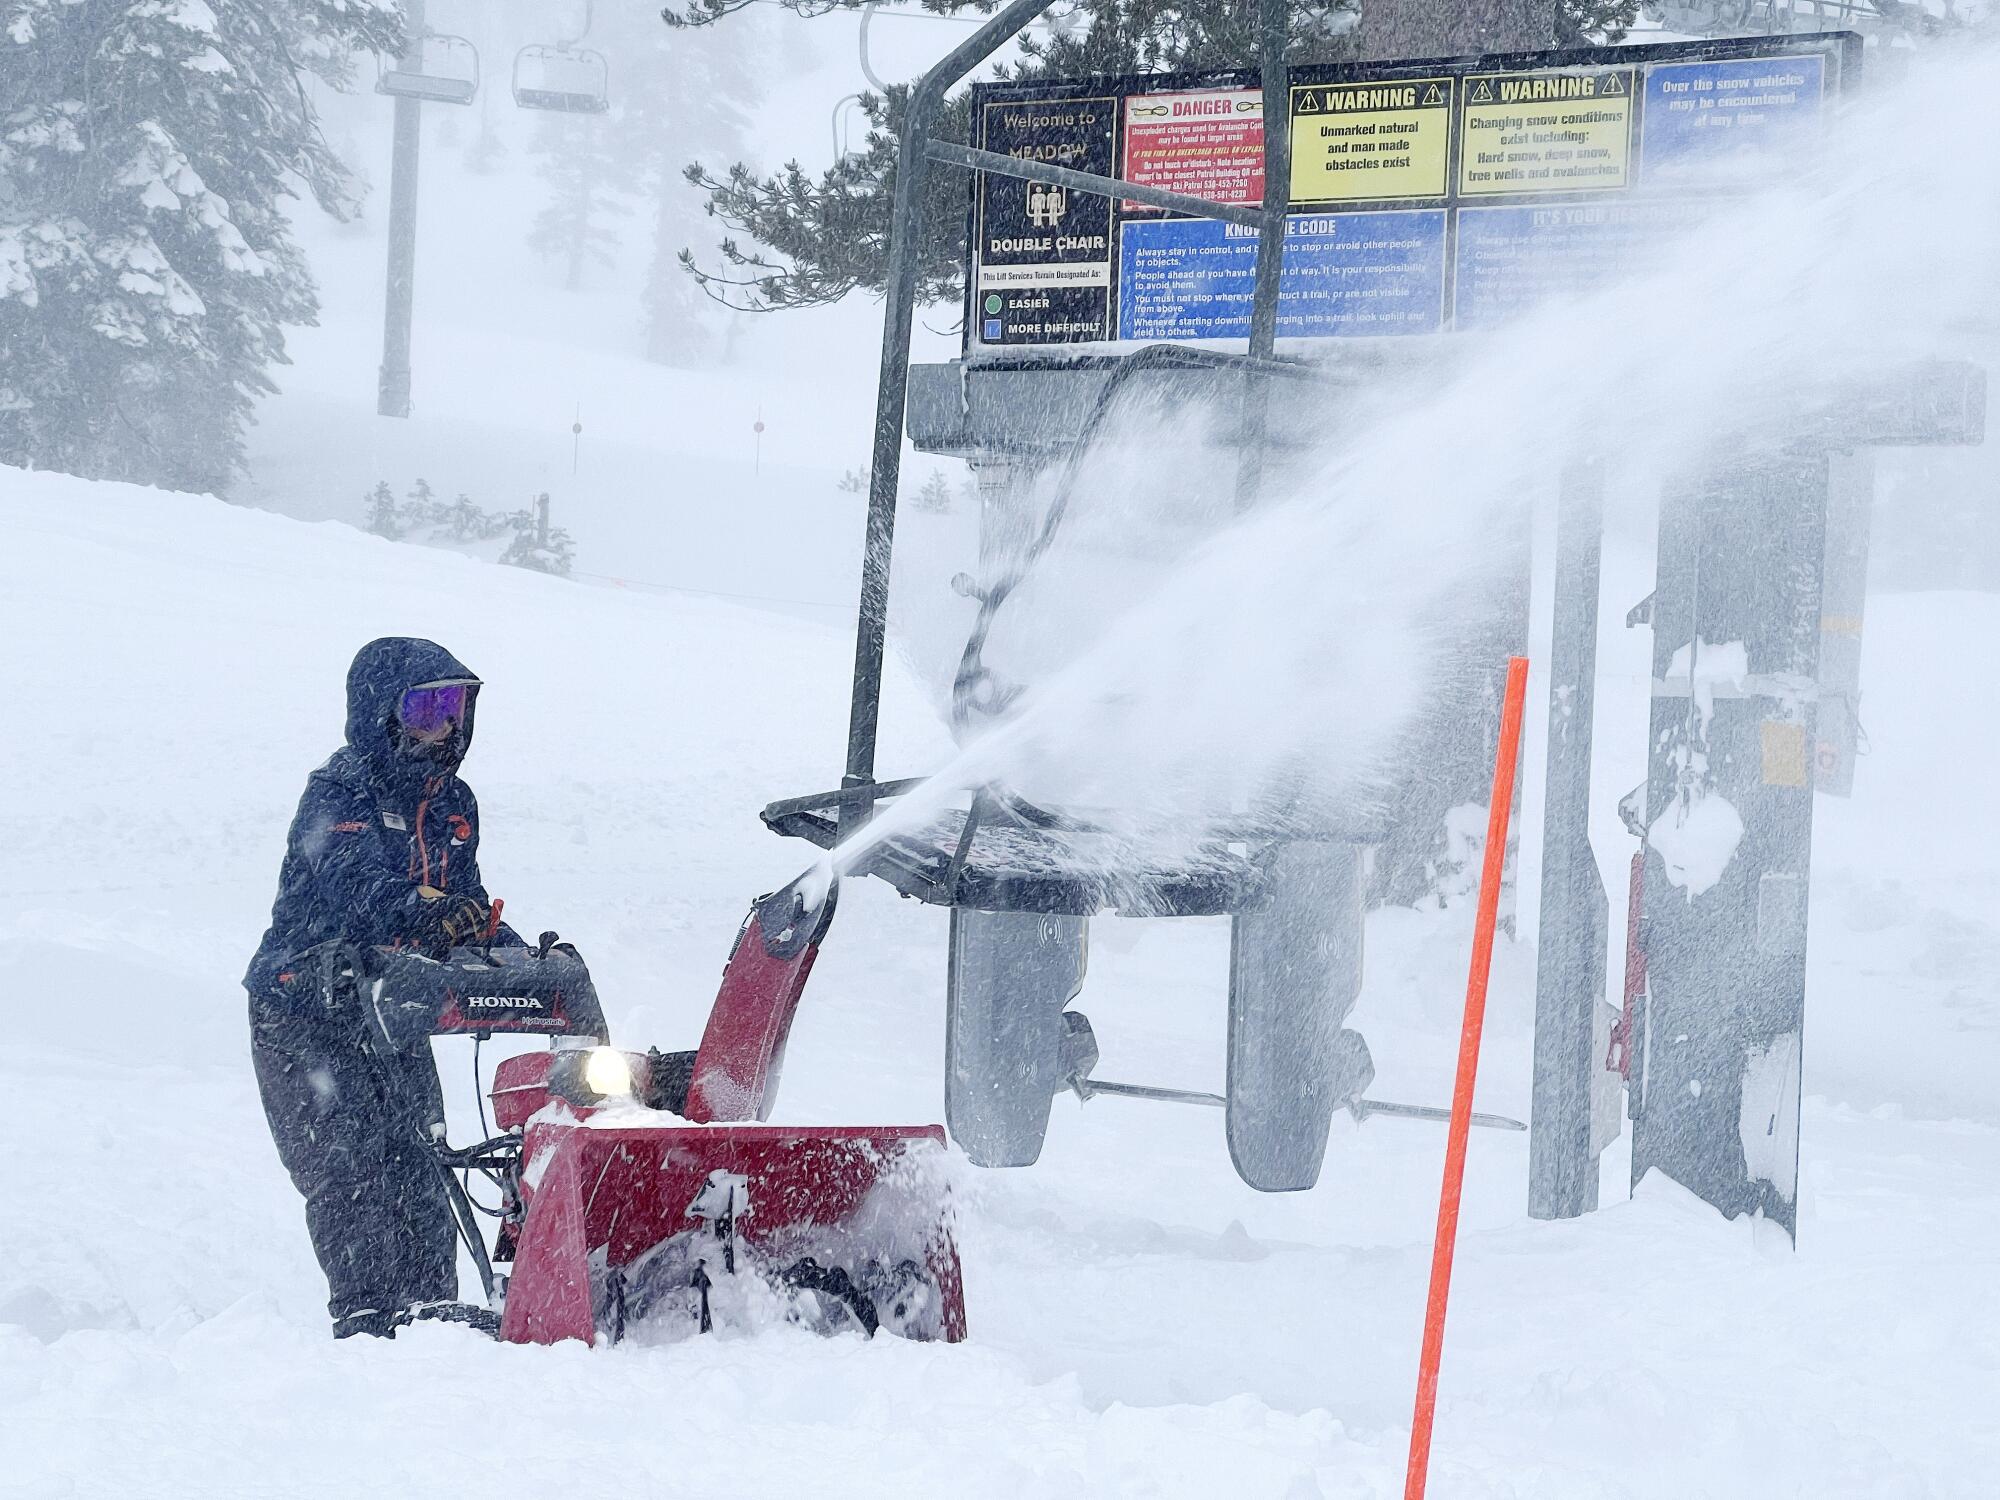 An employee uses a snowplow to remove snow at a ski resort near a ski lift.